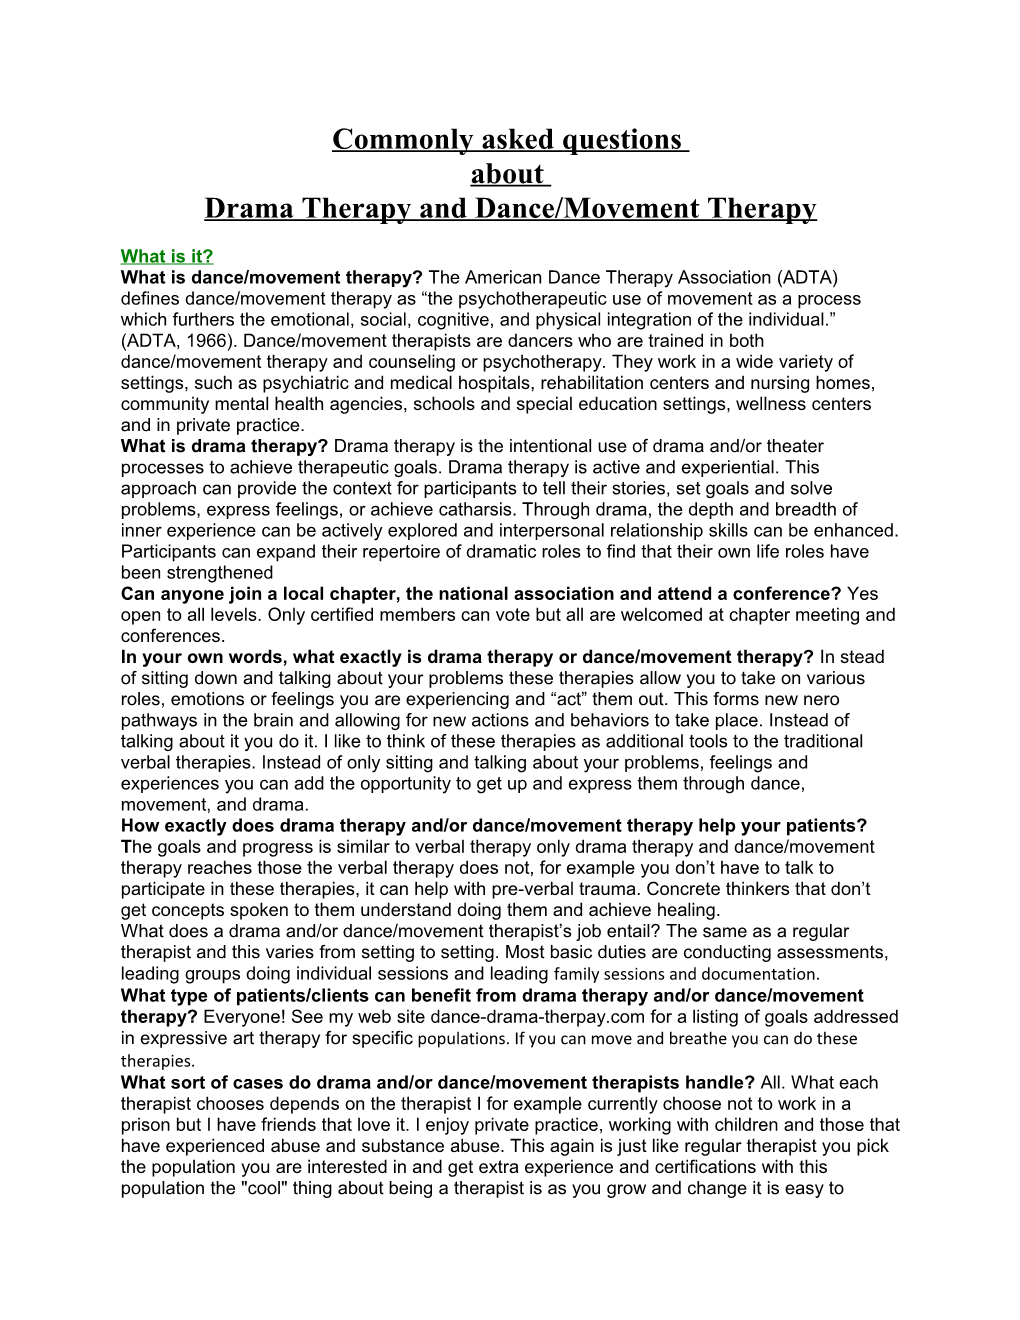 Drama Therapy Interview Questions